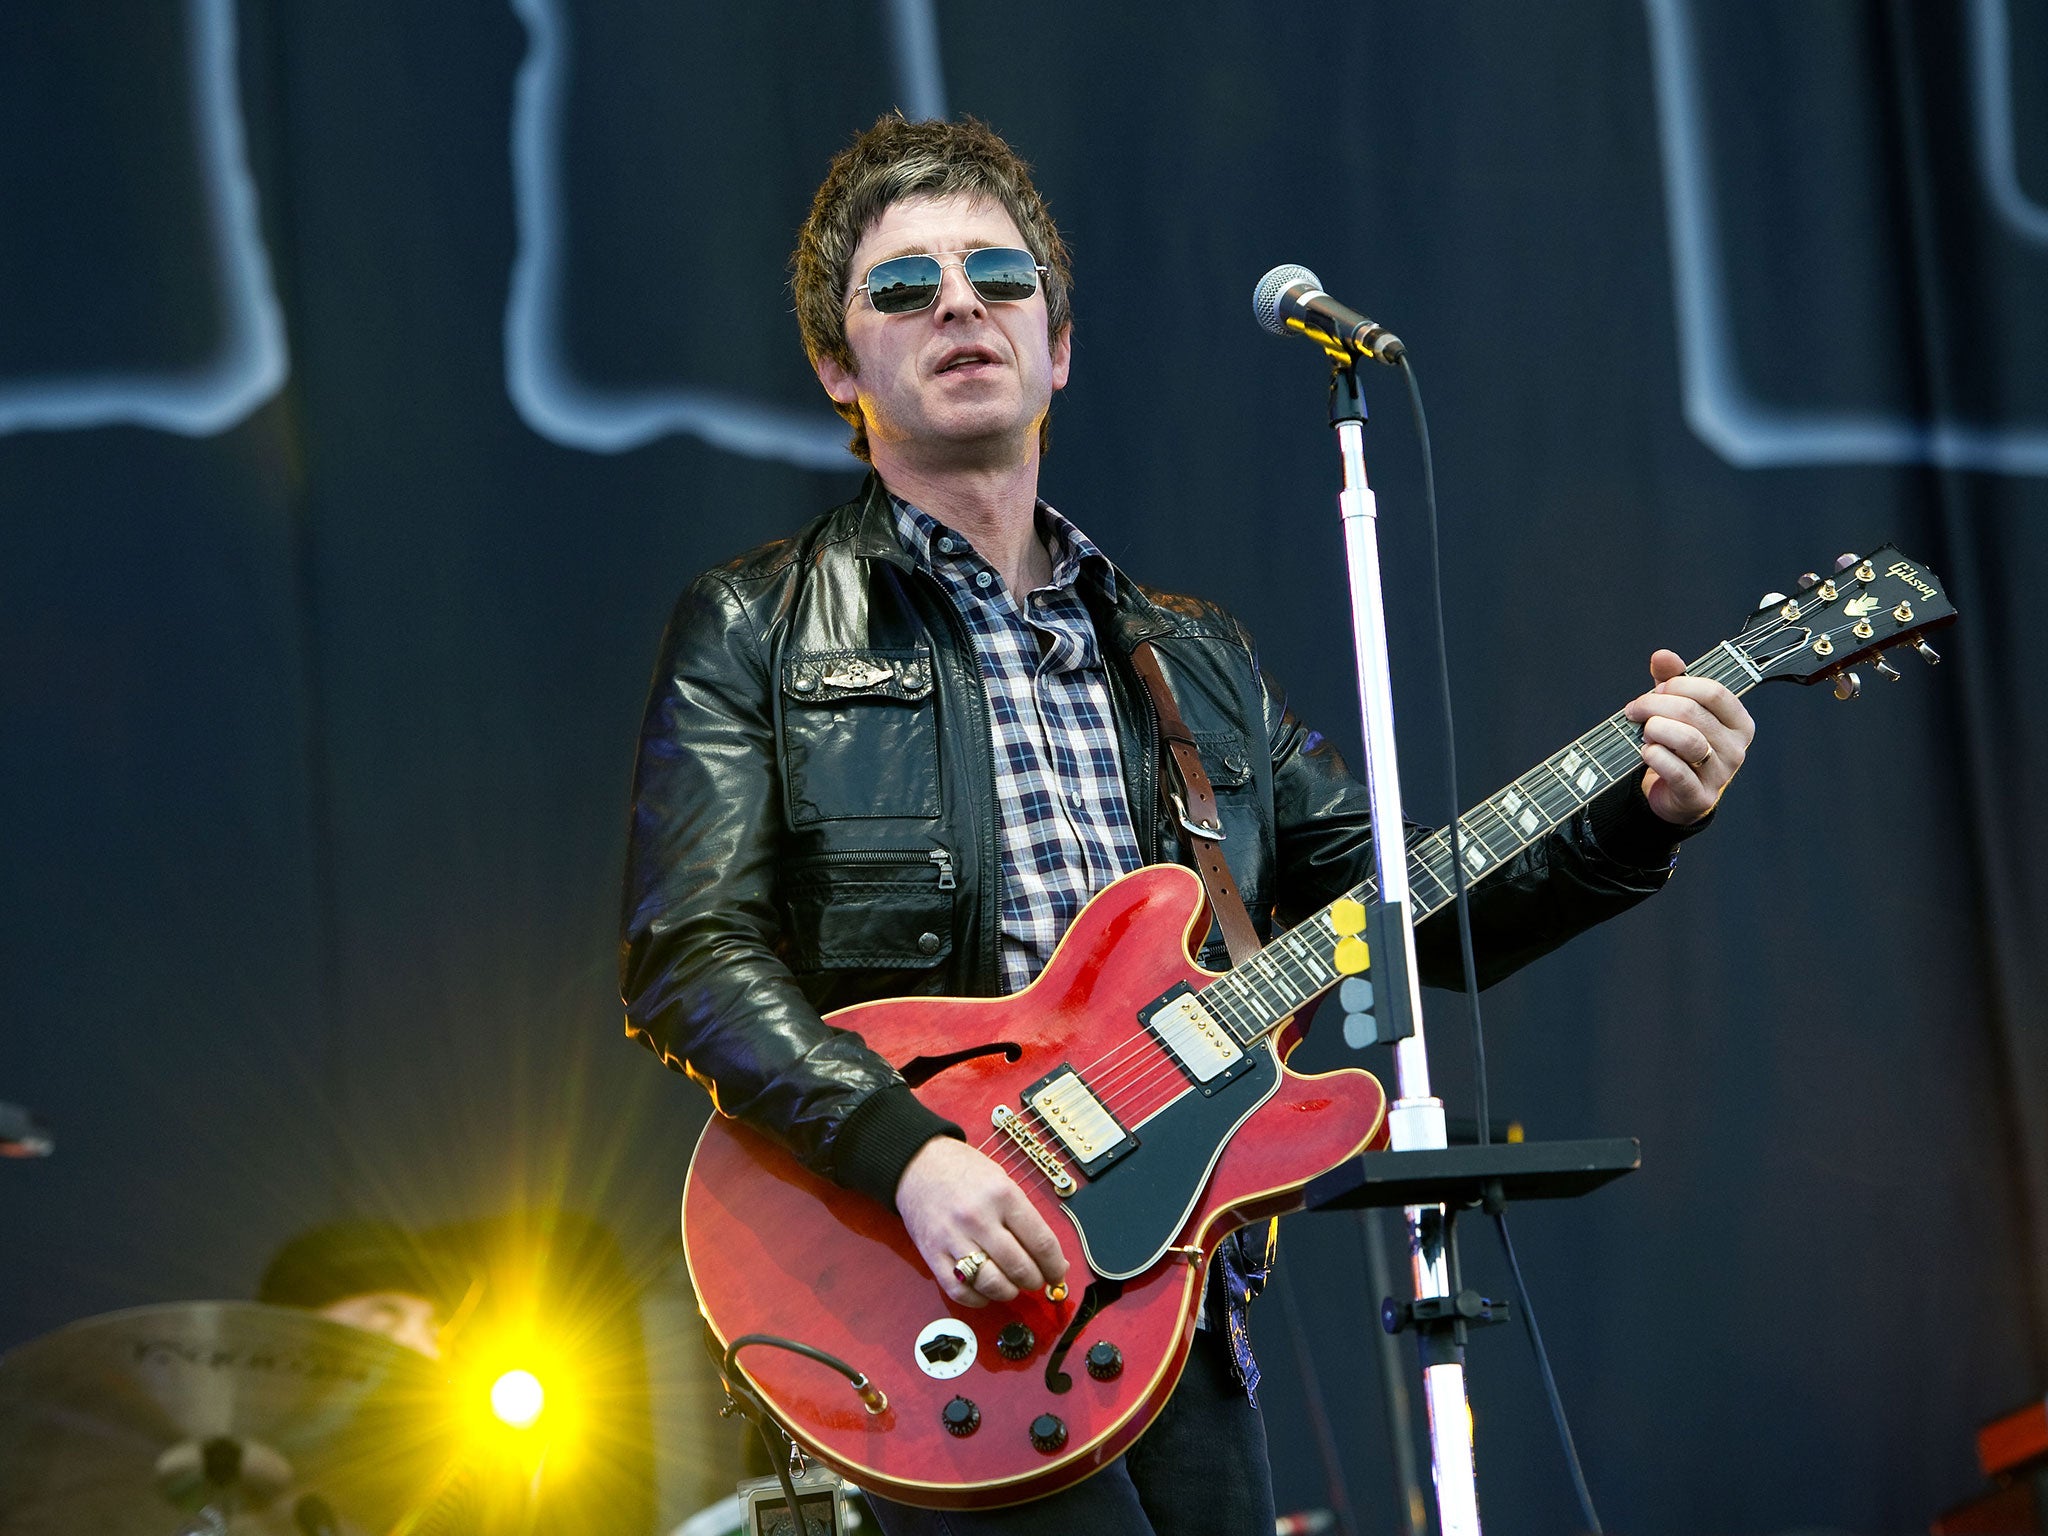 Noel Gallagher has put his name forward to sing the Spectre theme